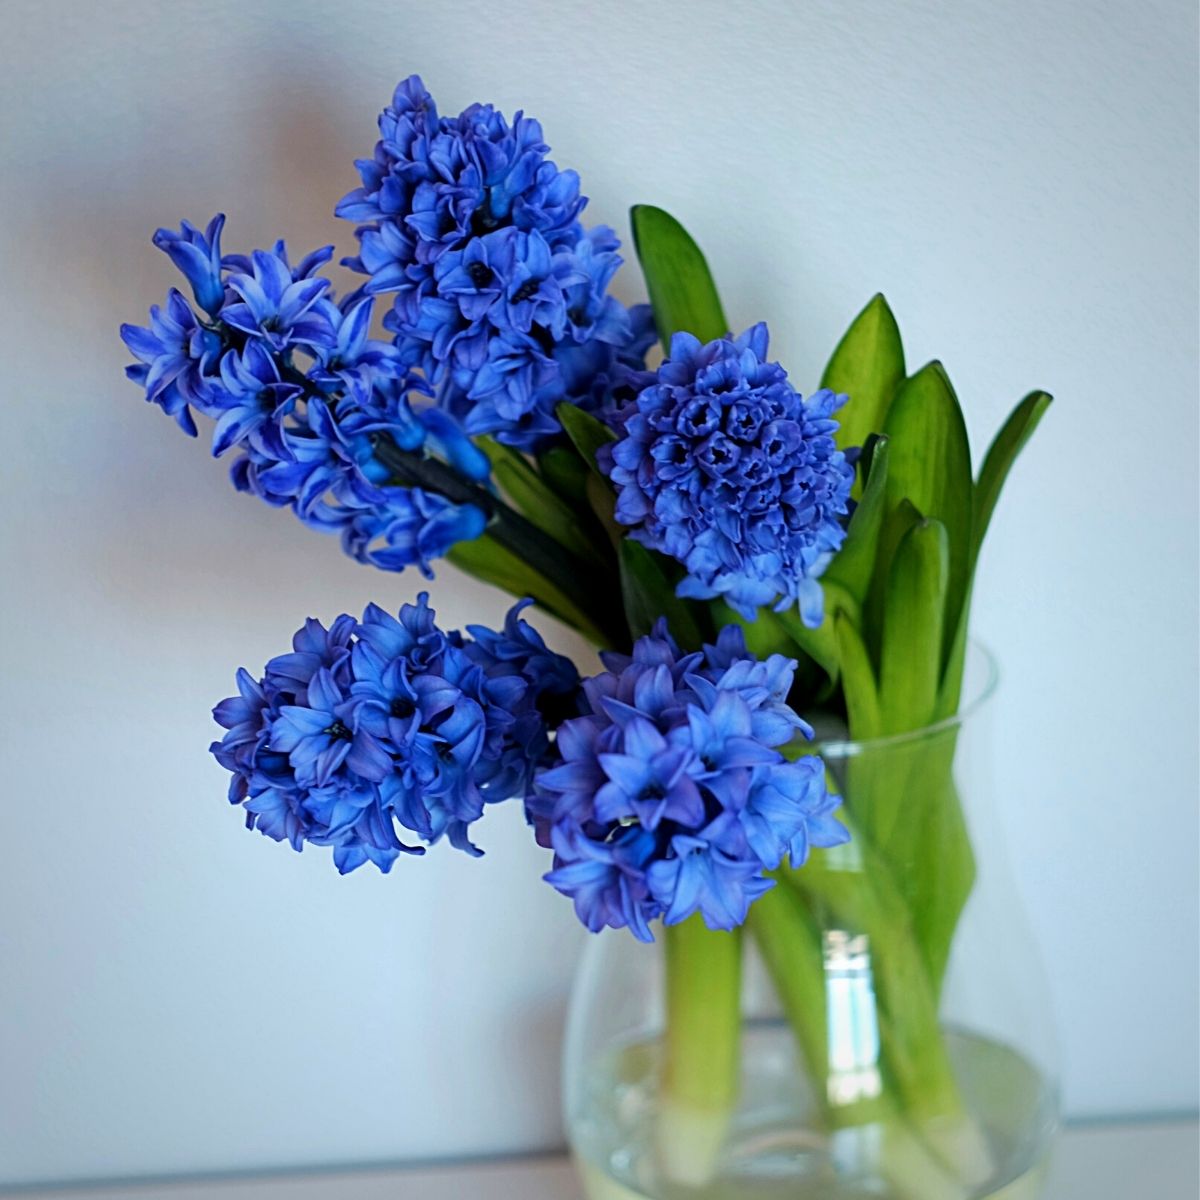 blue colored hycinth flowers in a vase